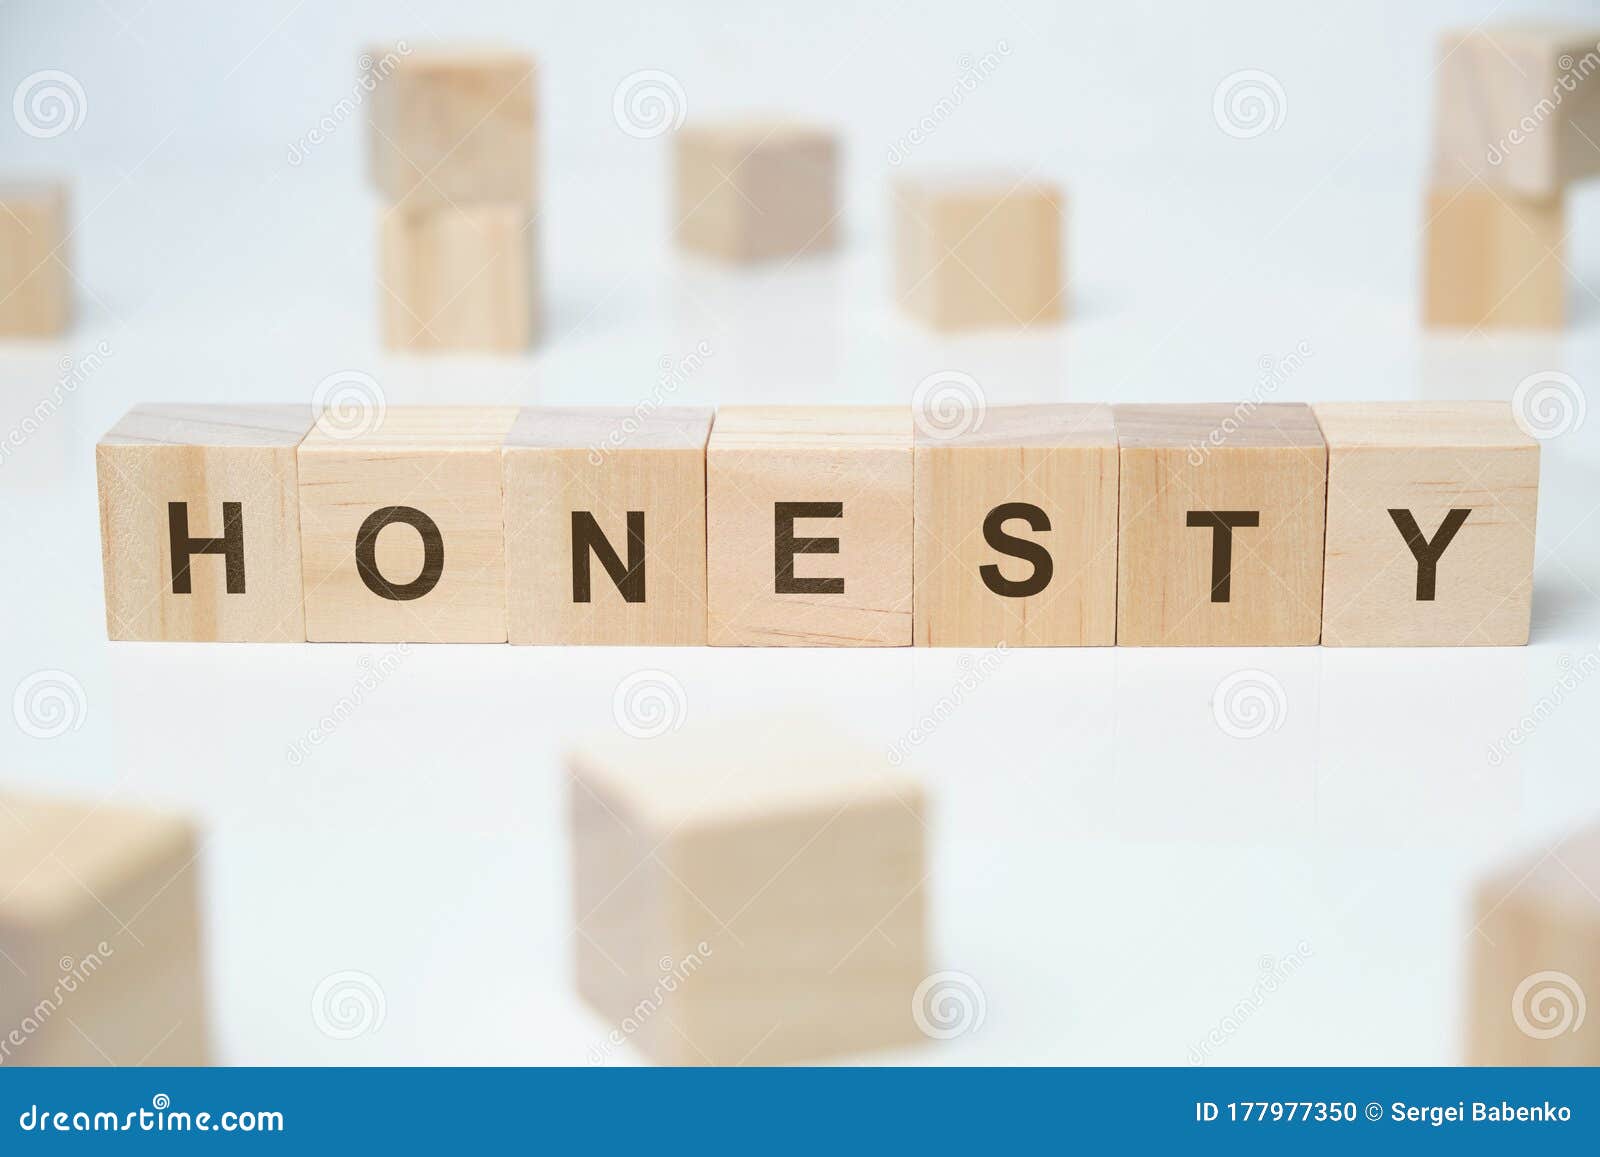 modern business buzzword - honesty. word on wooden blocks on a white background